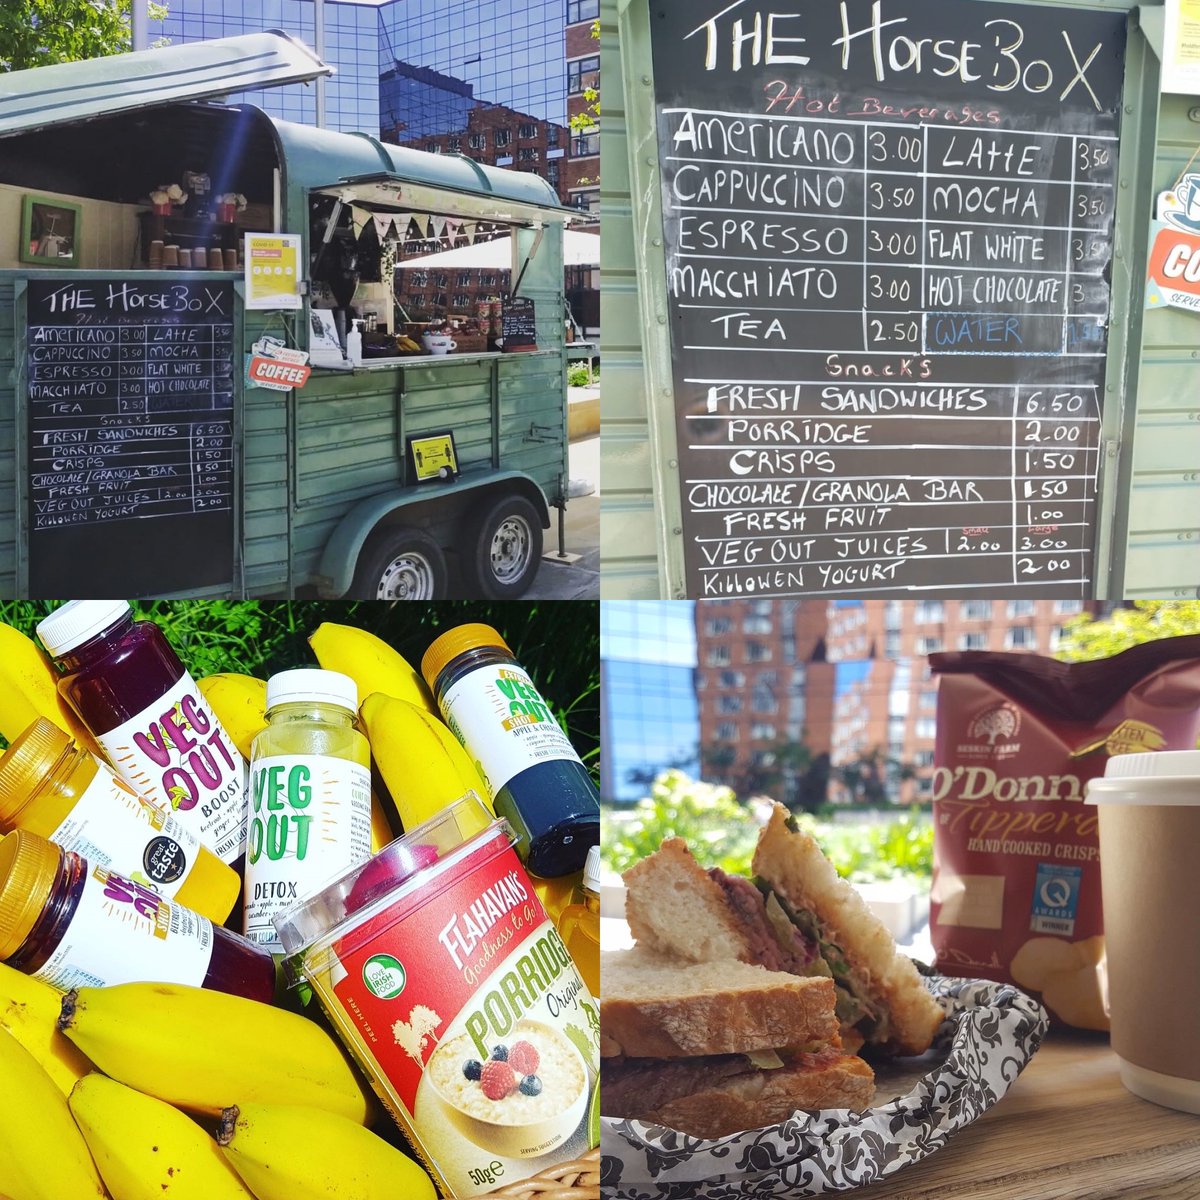 The Horsebox @conradublin is now open daily from 8am-4pm😊 Enjoy this glorious sunshine on Earlsfort Terrace with a freshly made sandwich and coffee or juice 😍 #thehorsebox #conraddublin